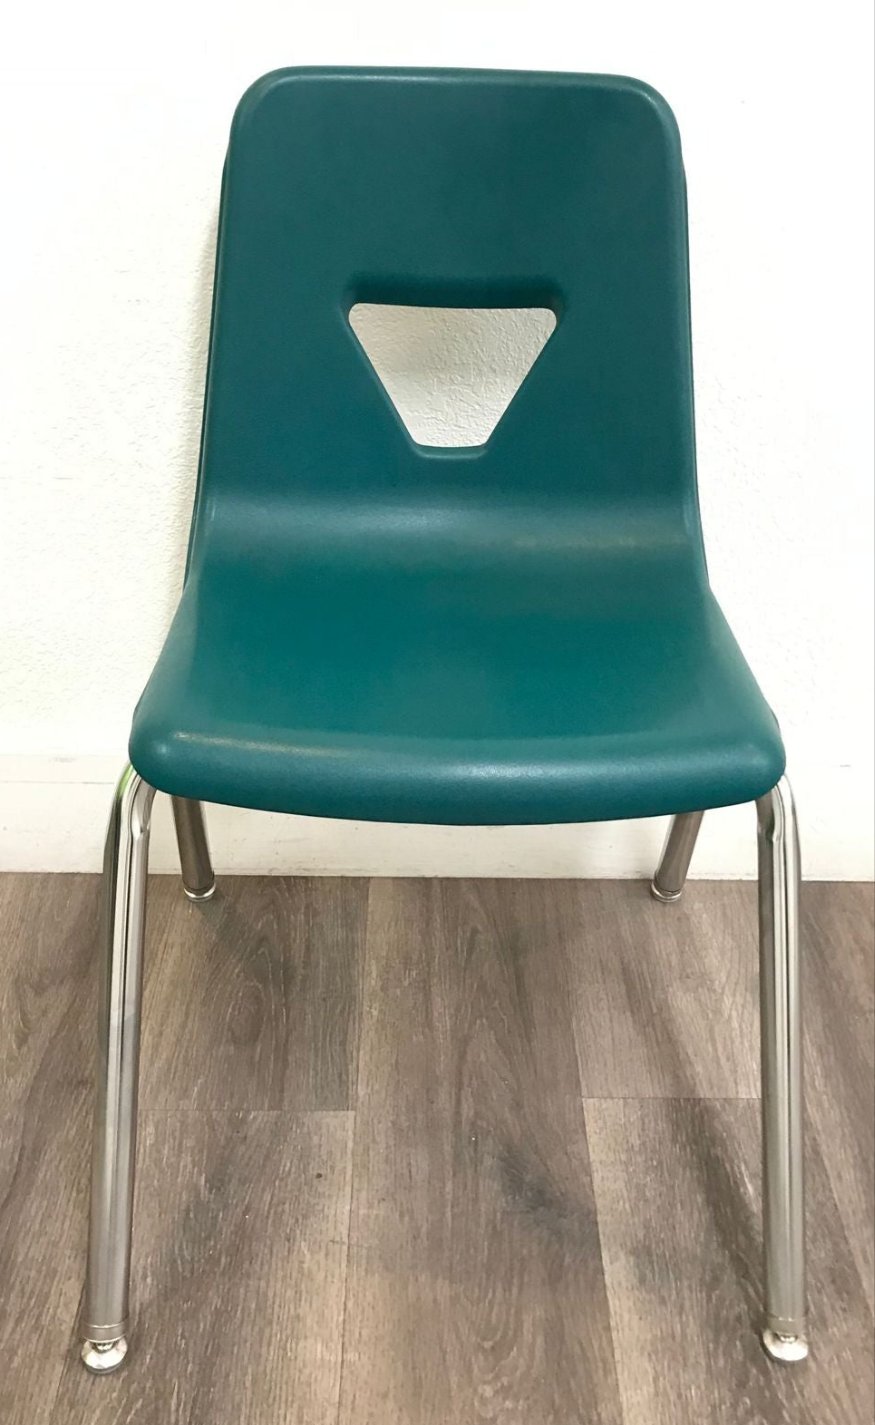 18in Virco 2000 Series Student Chair, Green (RF)